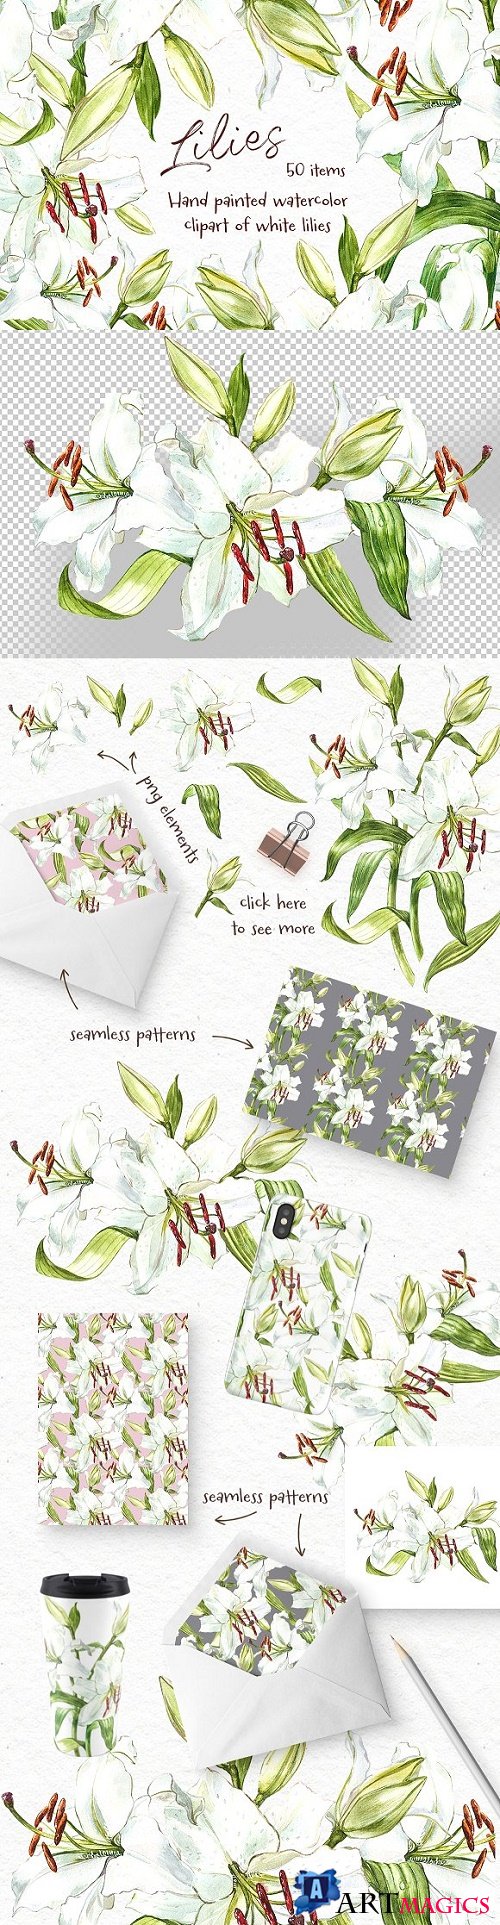 White Lilies watercolor clipart 2356766